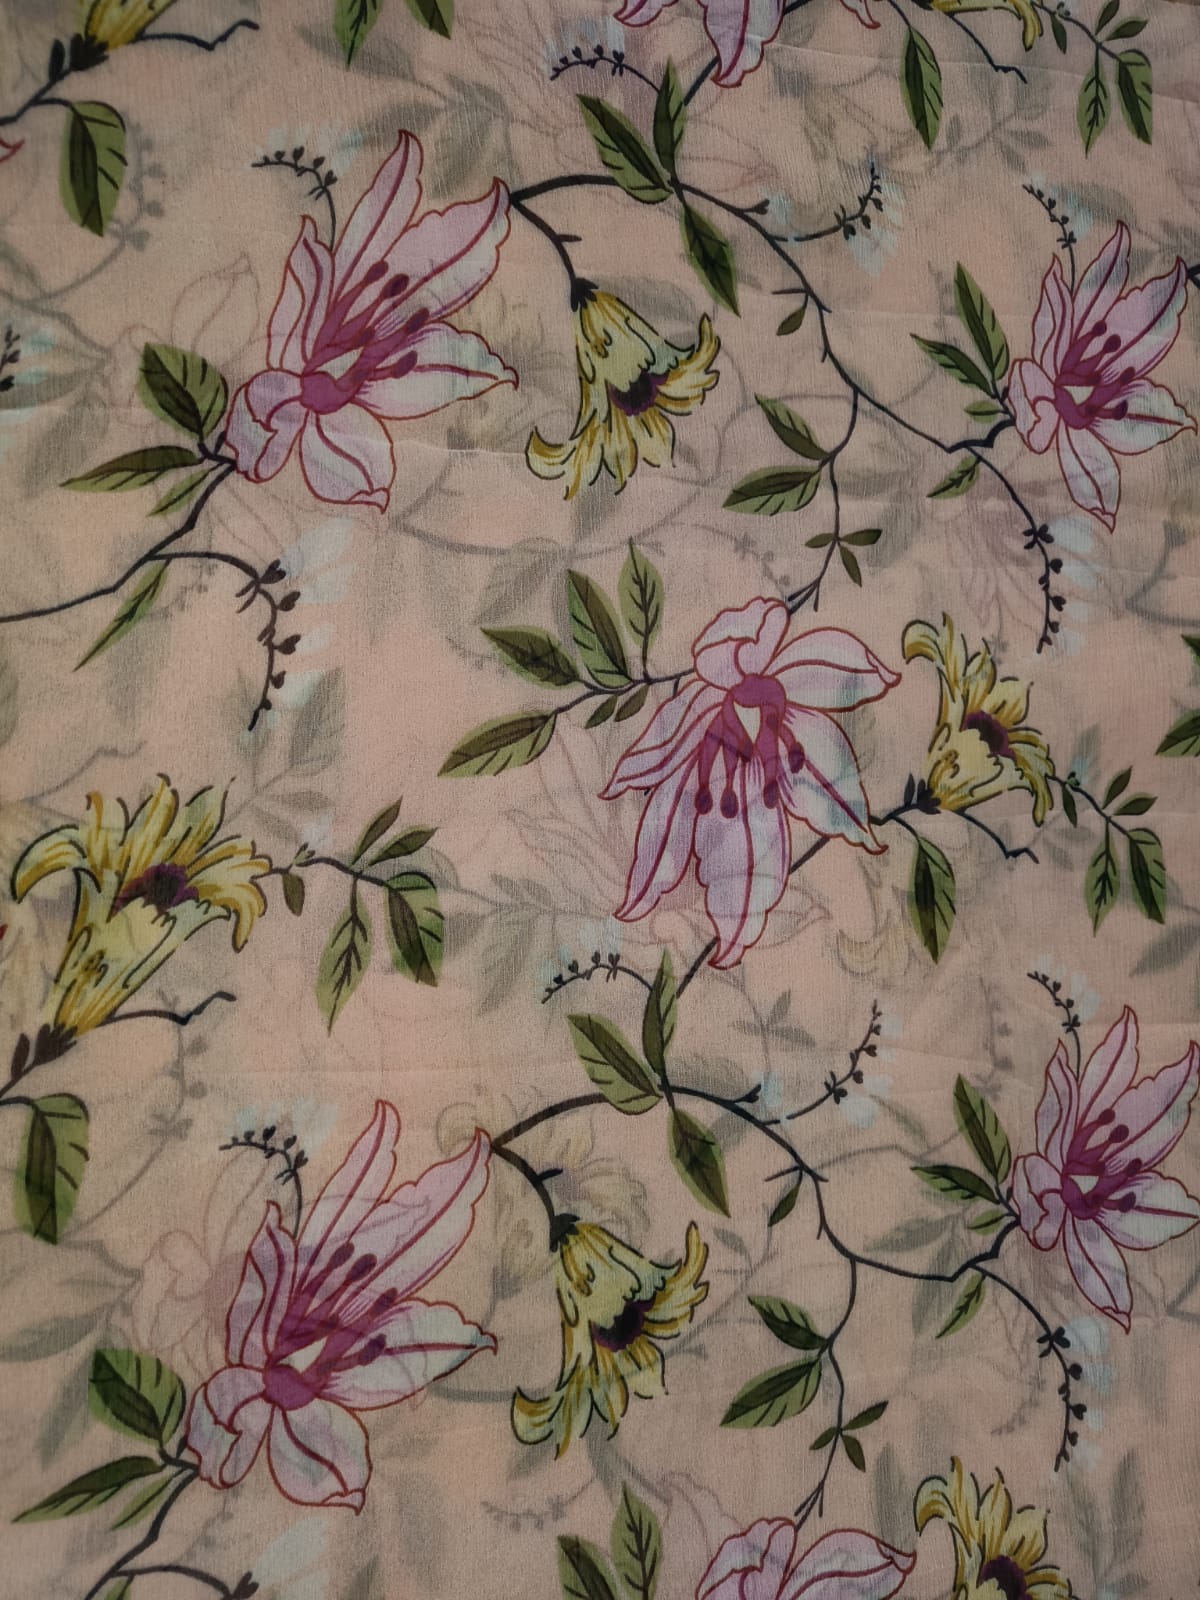 Silk Chiffon Digital Floral Print fabric 60gms 44" wide available in two colors 12799/800]